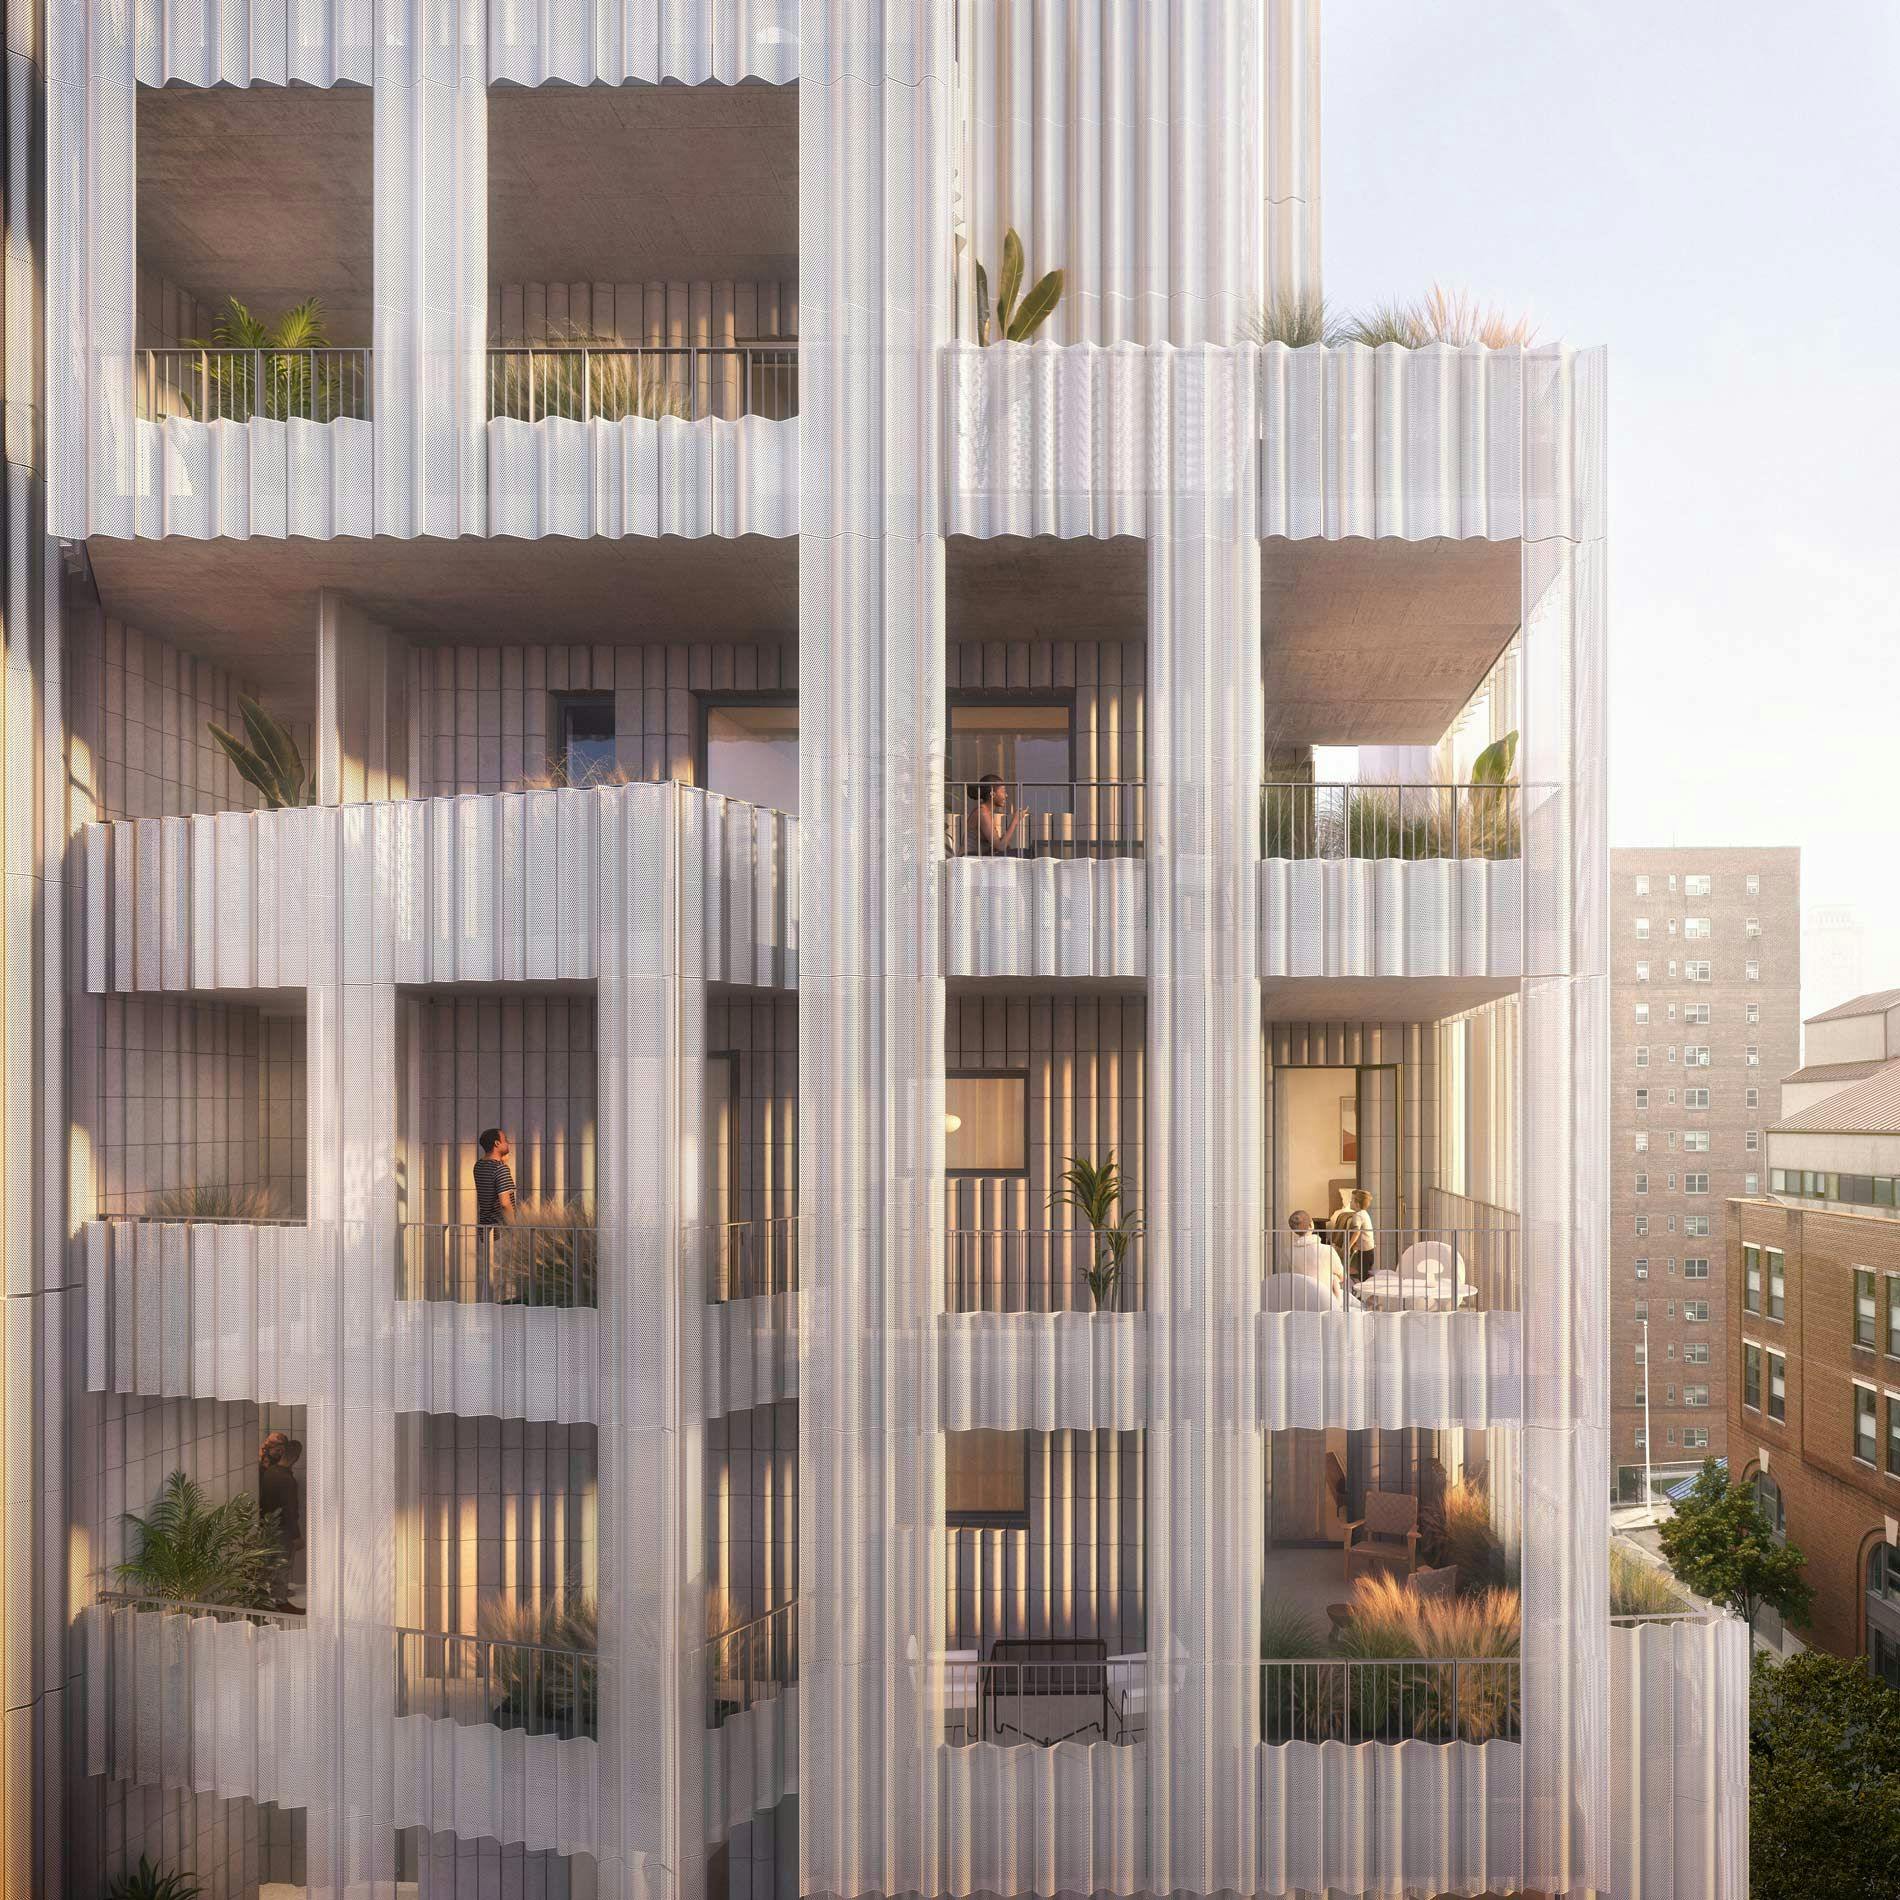 Publication Image for '9 Chapel' Tower by SO-IL Will Shimmer in Downtown Brooklyn